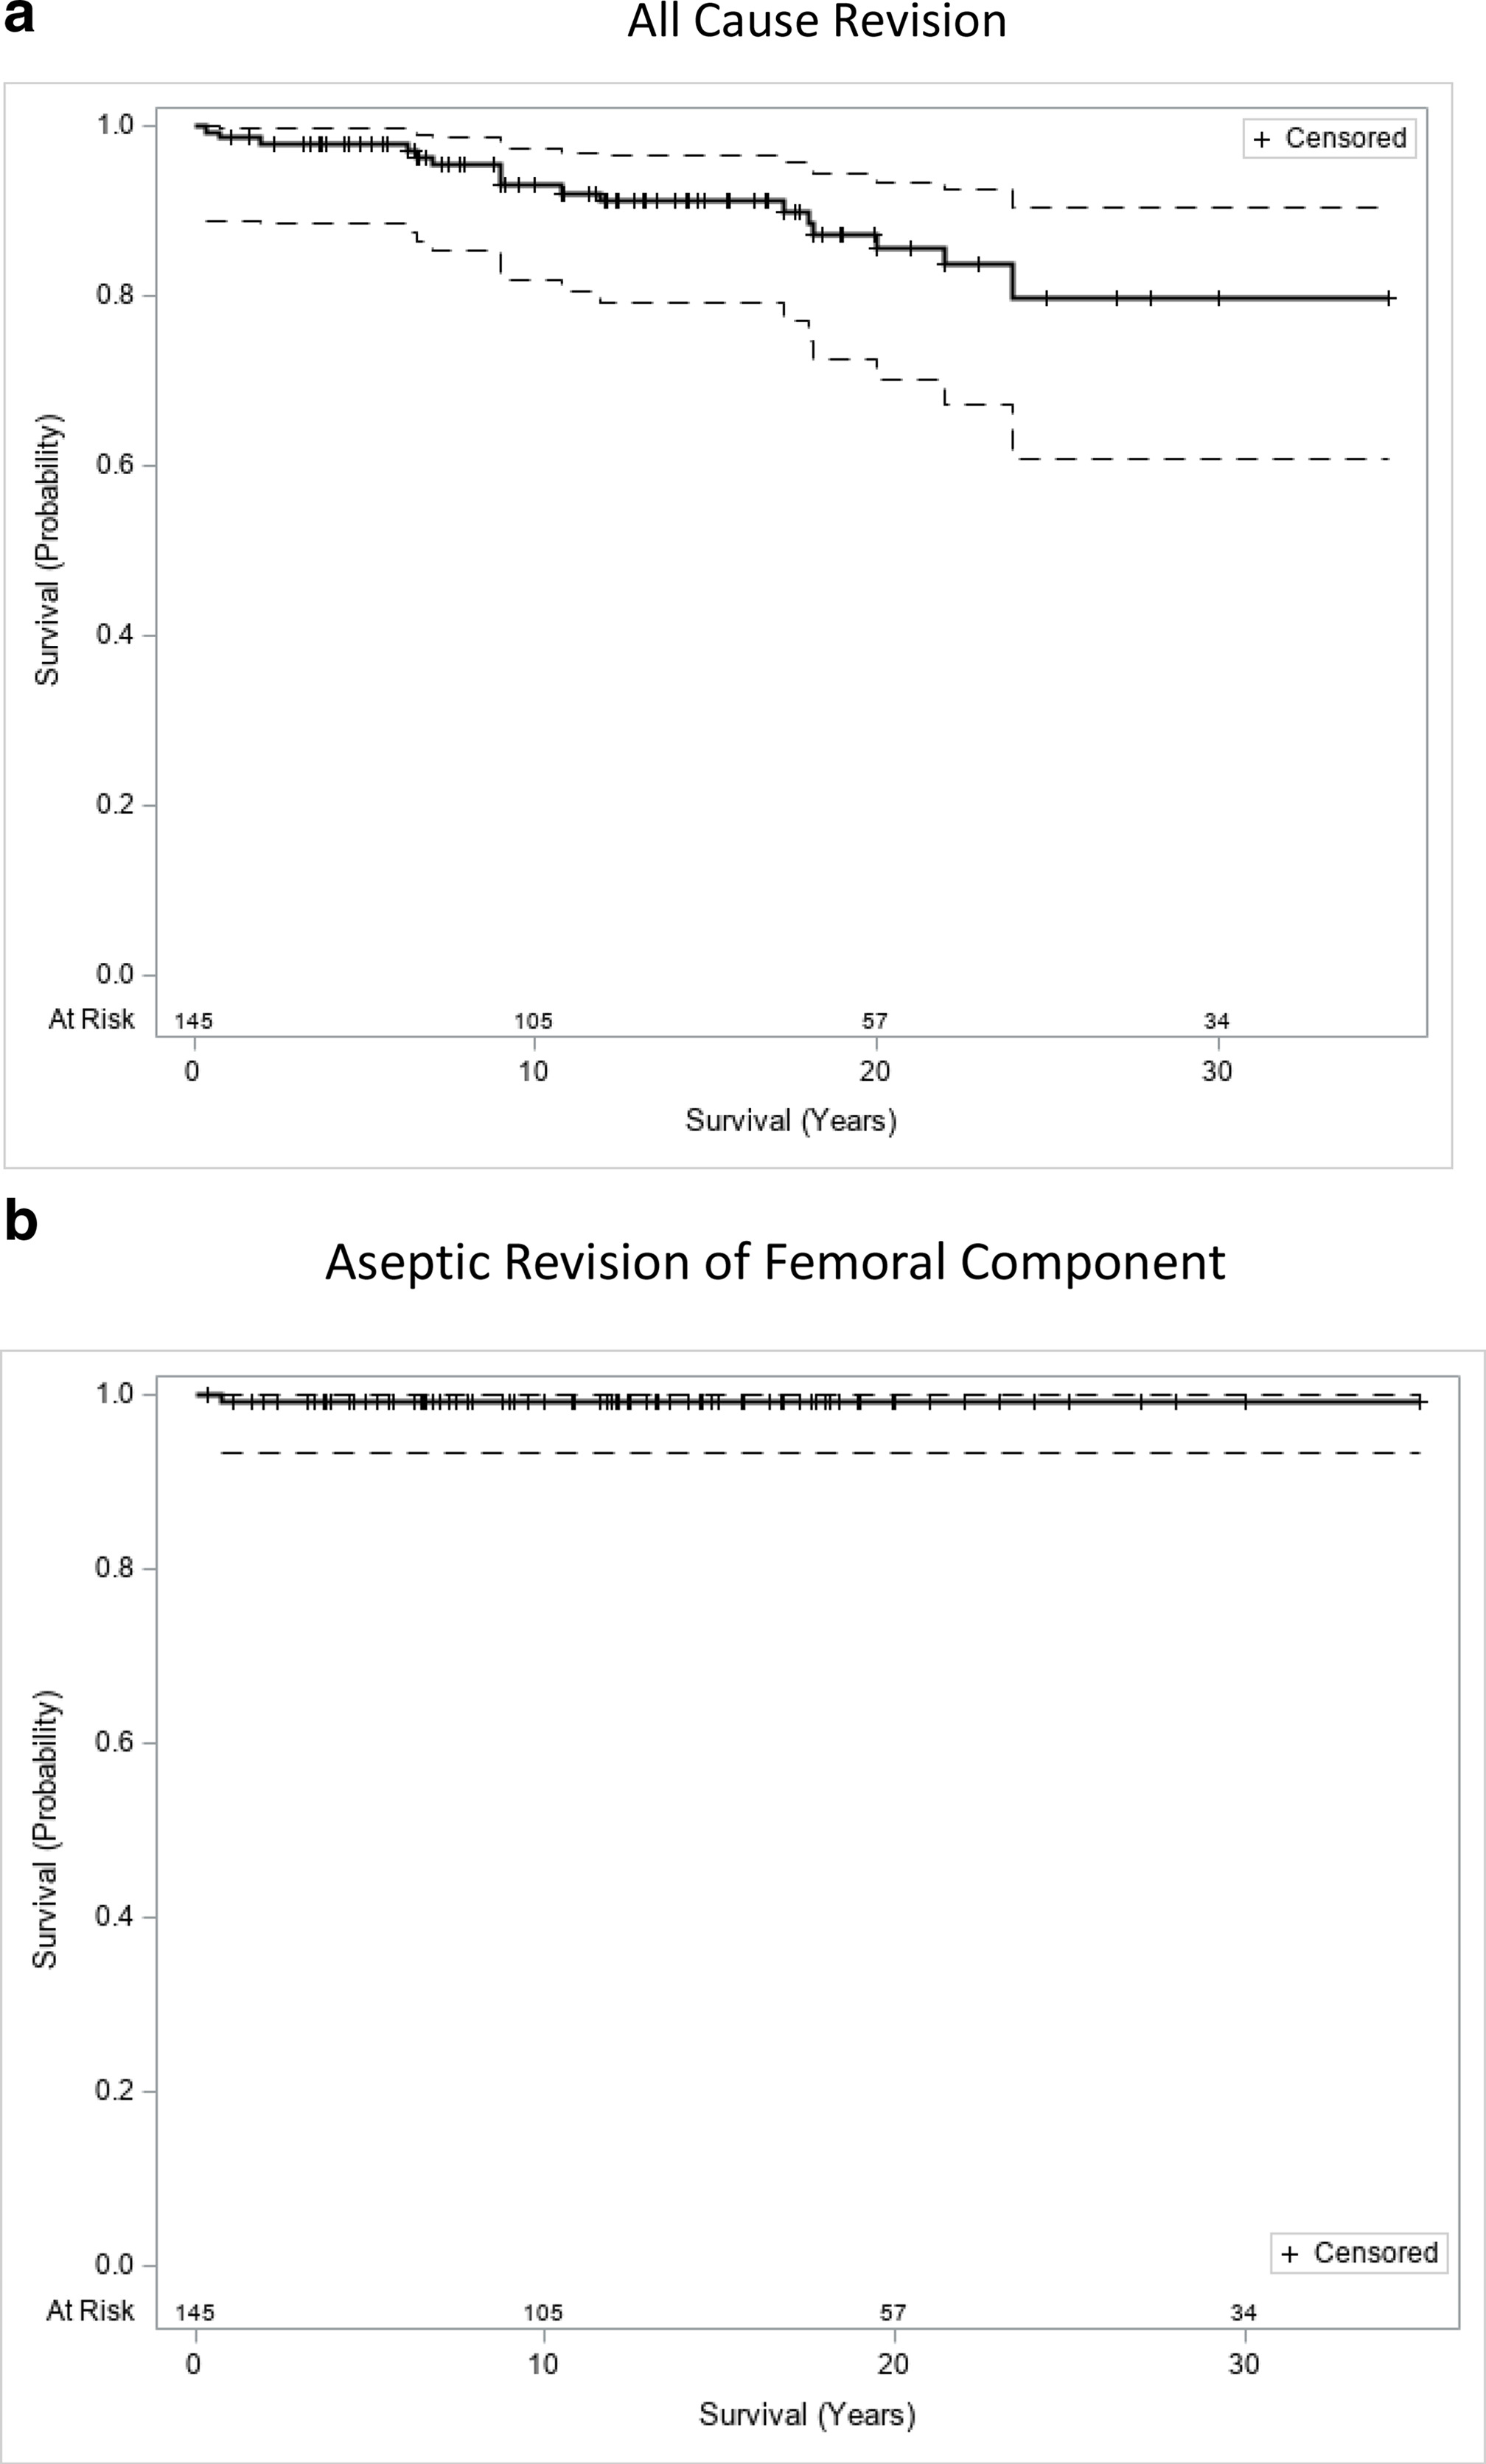 Fig. 3 
            a) Survivorship curve with 95% confidence intervals (CIs), as determined by the Kaplan-Meier method. With revision of the femoral component for any reason as the endpoint, Kaplan-Meier analysis demonstrates a survival rate of 80% (95% CI 61% to 90%) at 35 years for the entire series of 145 primary total hip arthroplasties. Patient deaths (censored) are depicted by the vertical lines on the graphs. b) Survivorship curve with 95% CIs, as determined by the Kaplan-Meier method. With revision of the stem for aseptic loosening as the end point, the 35-year survival rate was 99% (95% CI 93% to 99%). Patient deaths are depicted by the vertical lines on the graphs.
          